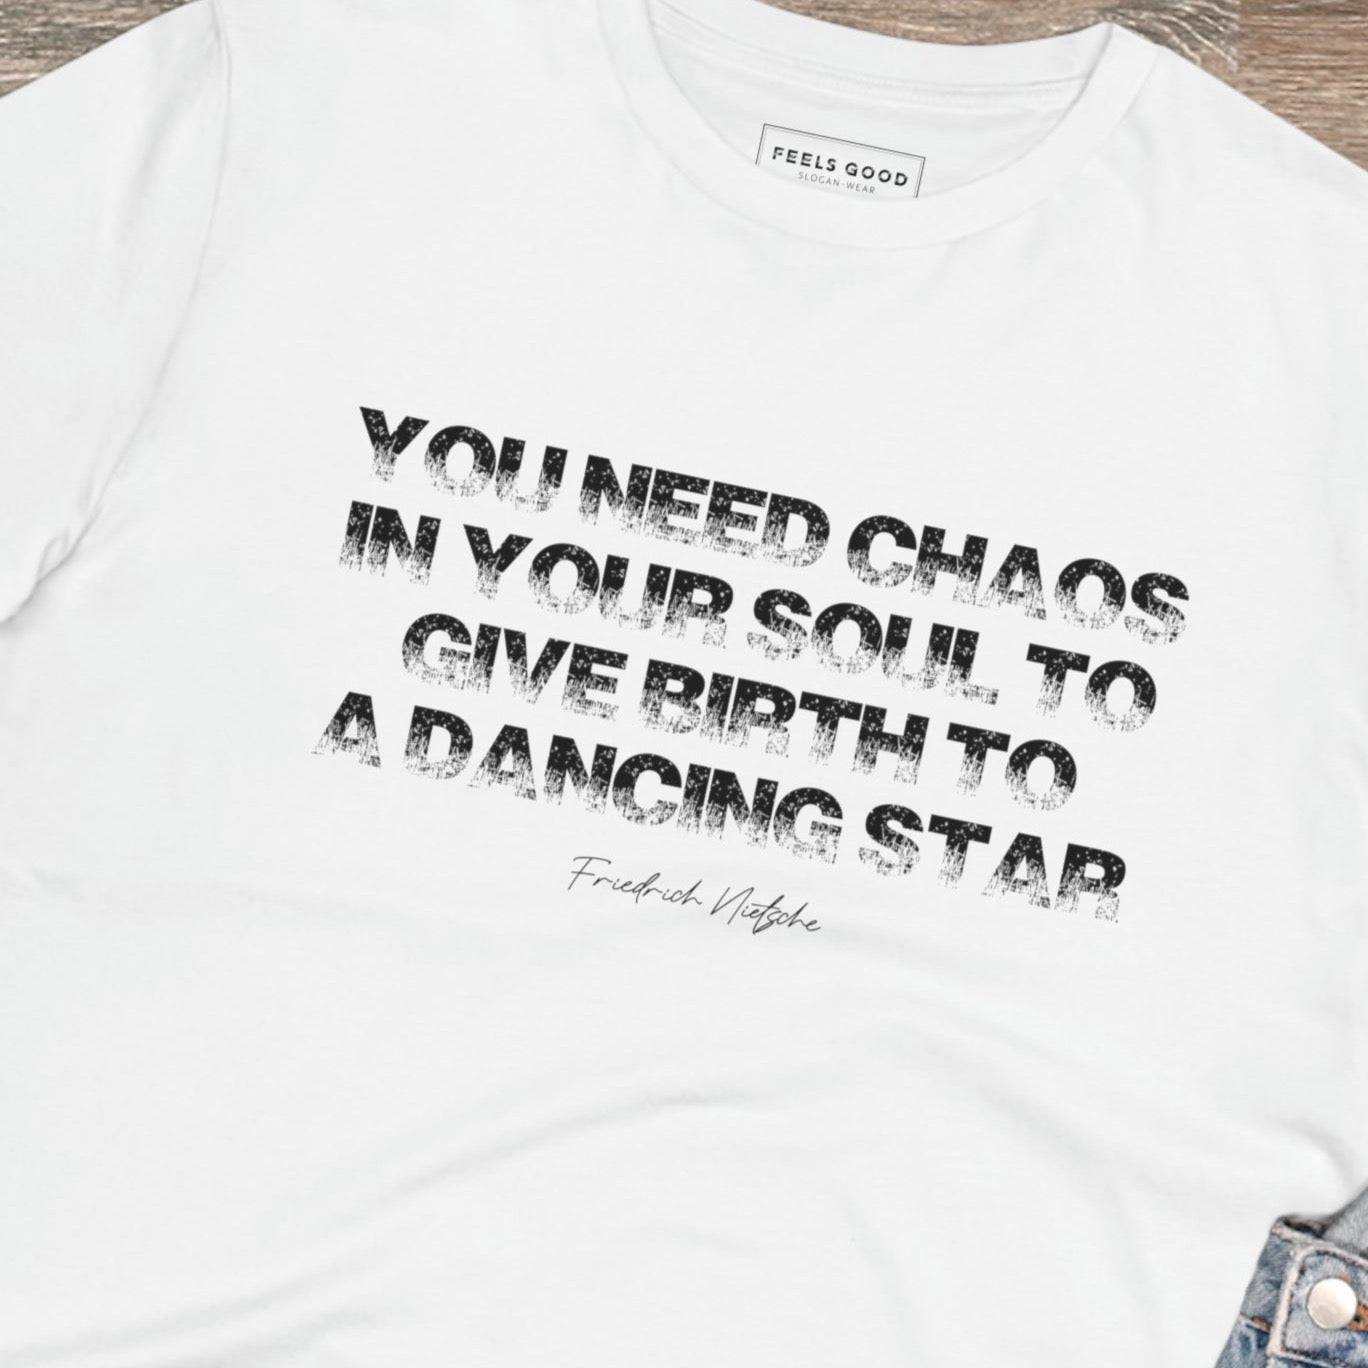 Famous Quotes 'Chaos In Your Soul' Nietsche Organic Cotton T-shirt - Eco Tee